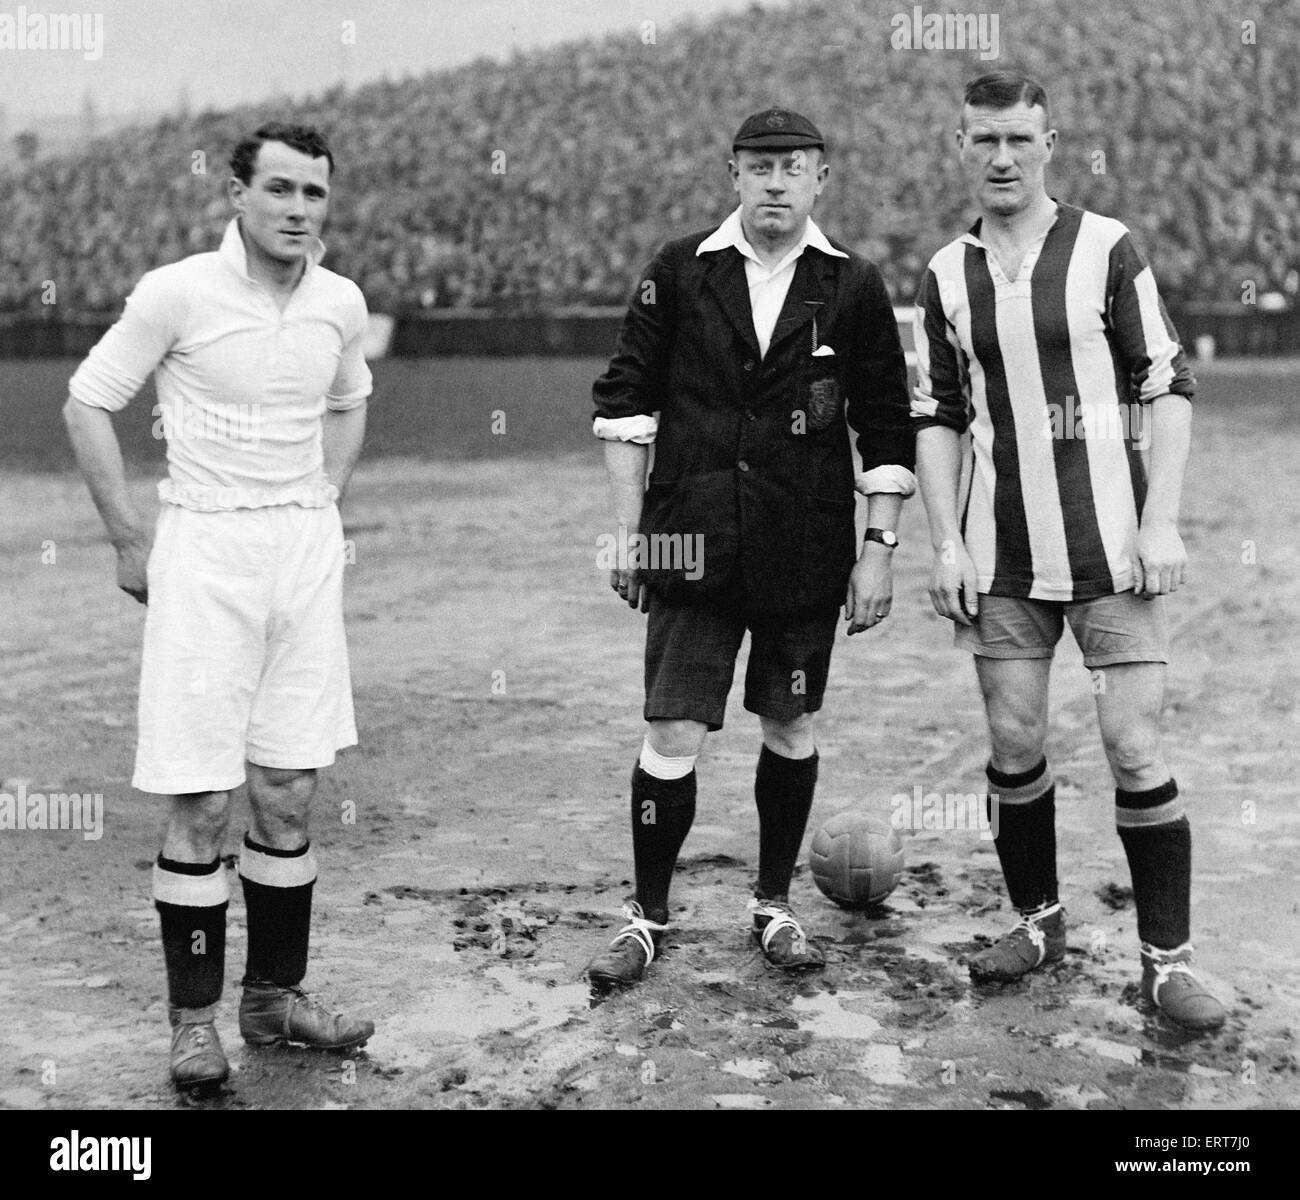 Swansea v Stoke FA Cup Tie. Joe Sykes of Swansea with referee P Harper and Bob McGrory seen here at the kick off of their FA Cup tie, 30th January 1926. Stock Photo